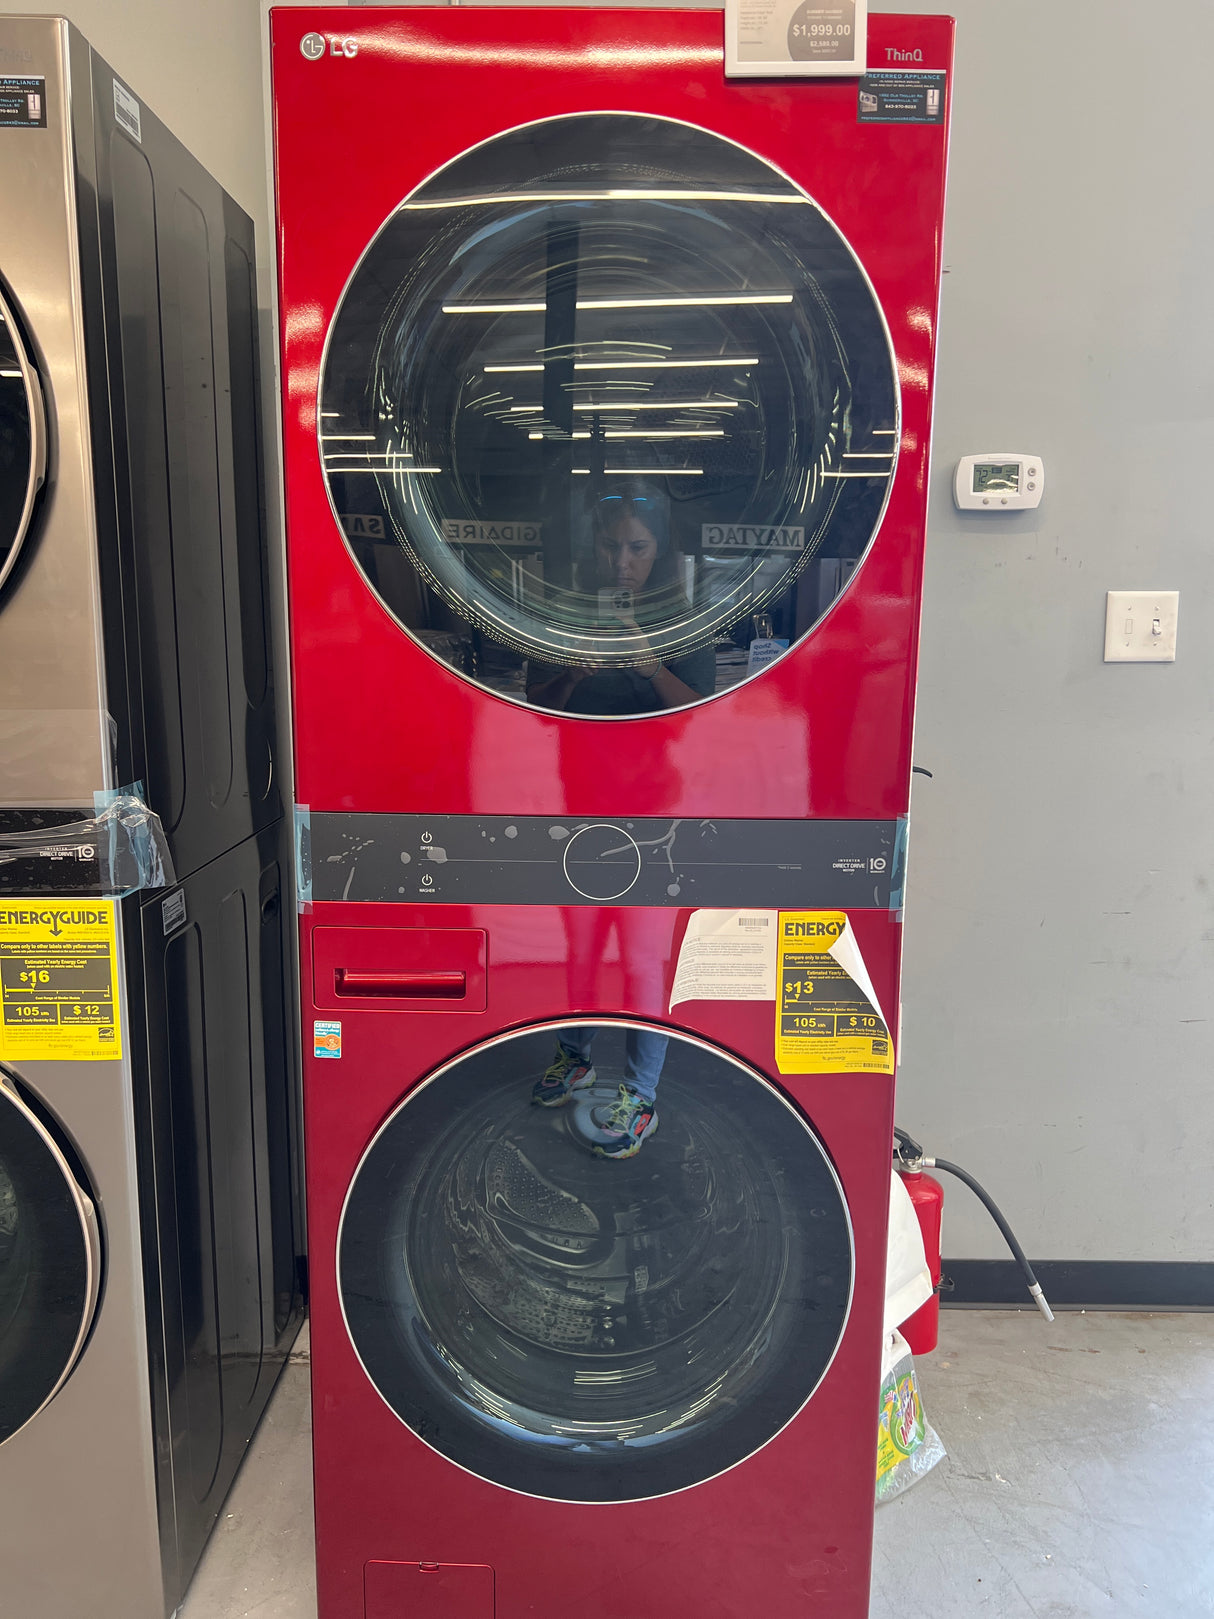 WKEX200HRA LG 4.5 ft.³ washer 7.4 ft.³ dryer candy, apple red stack laundry